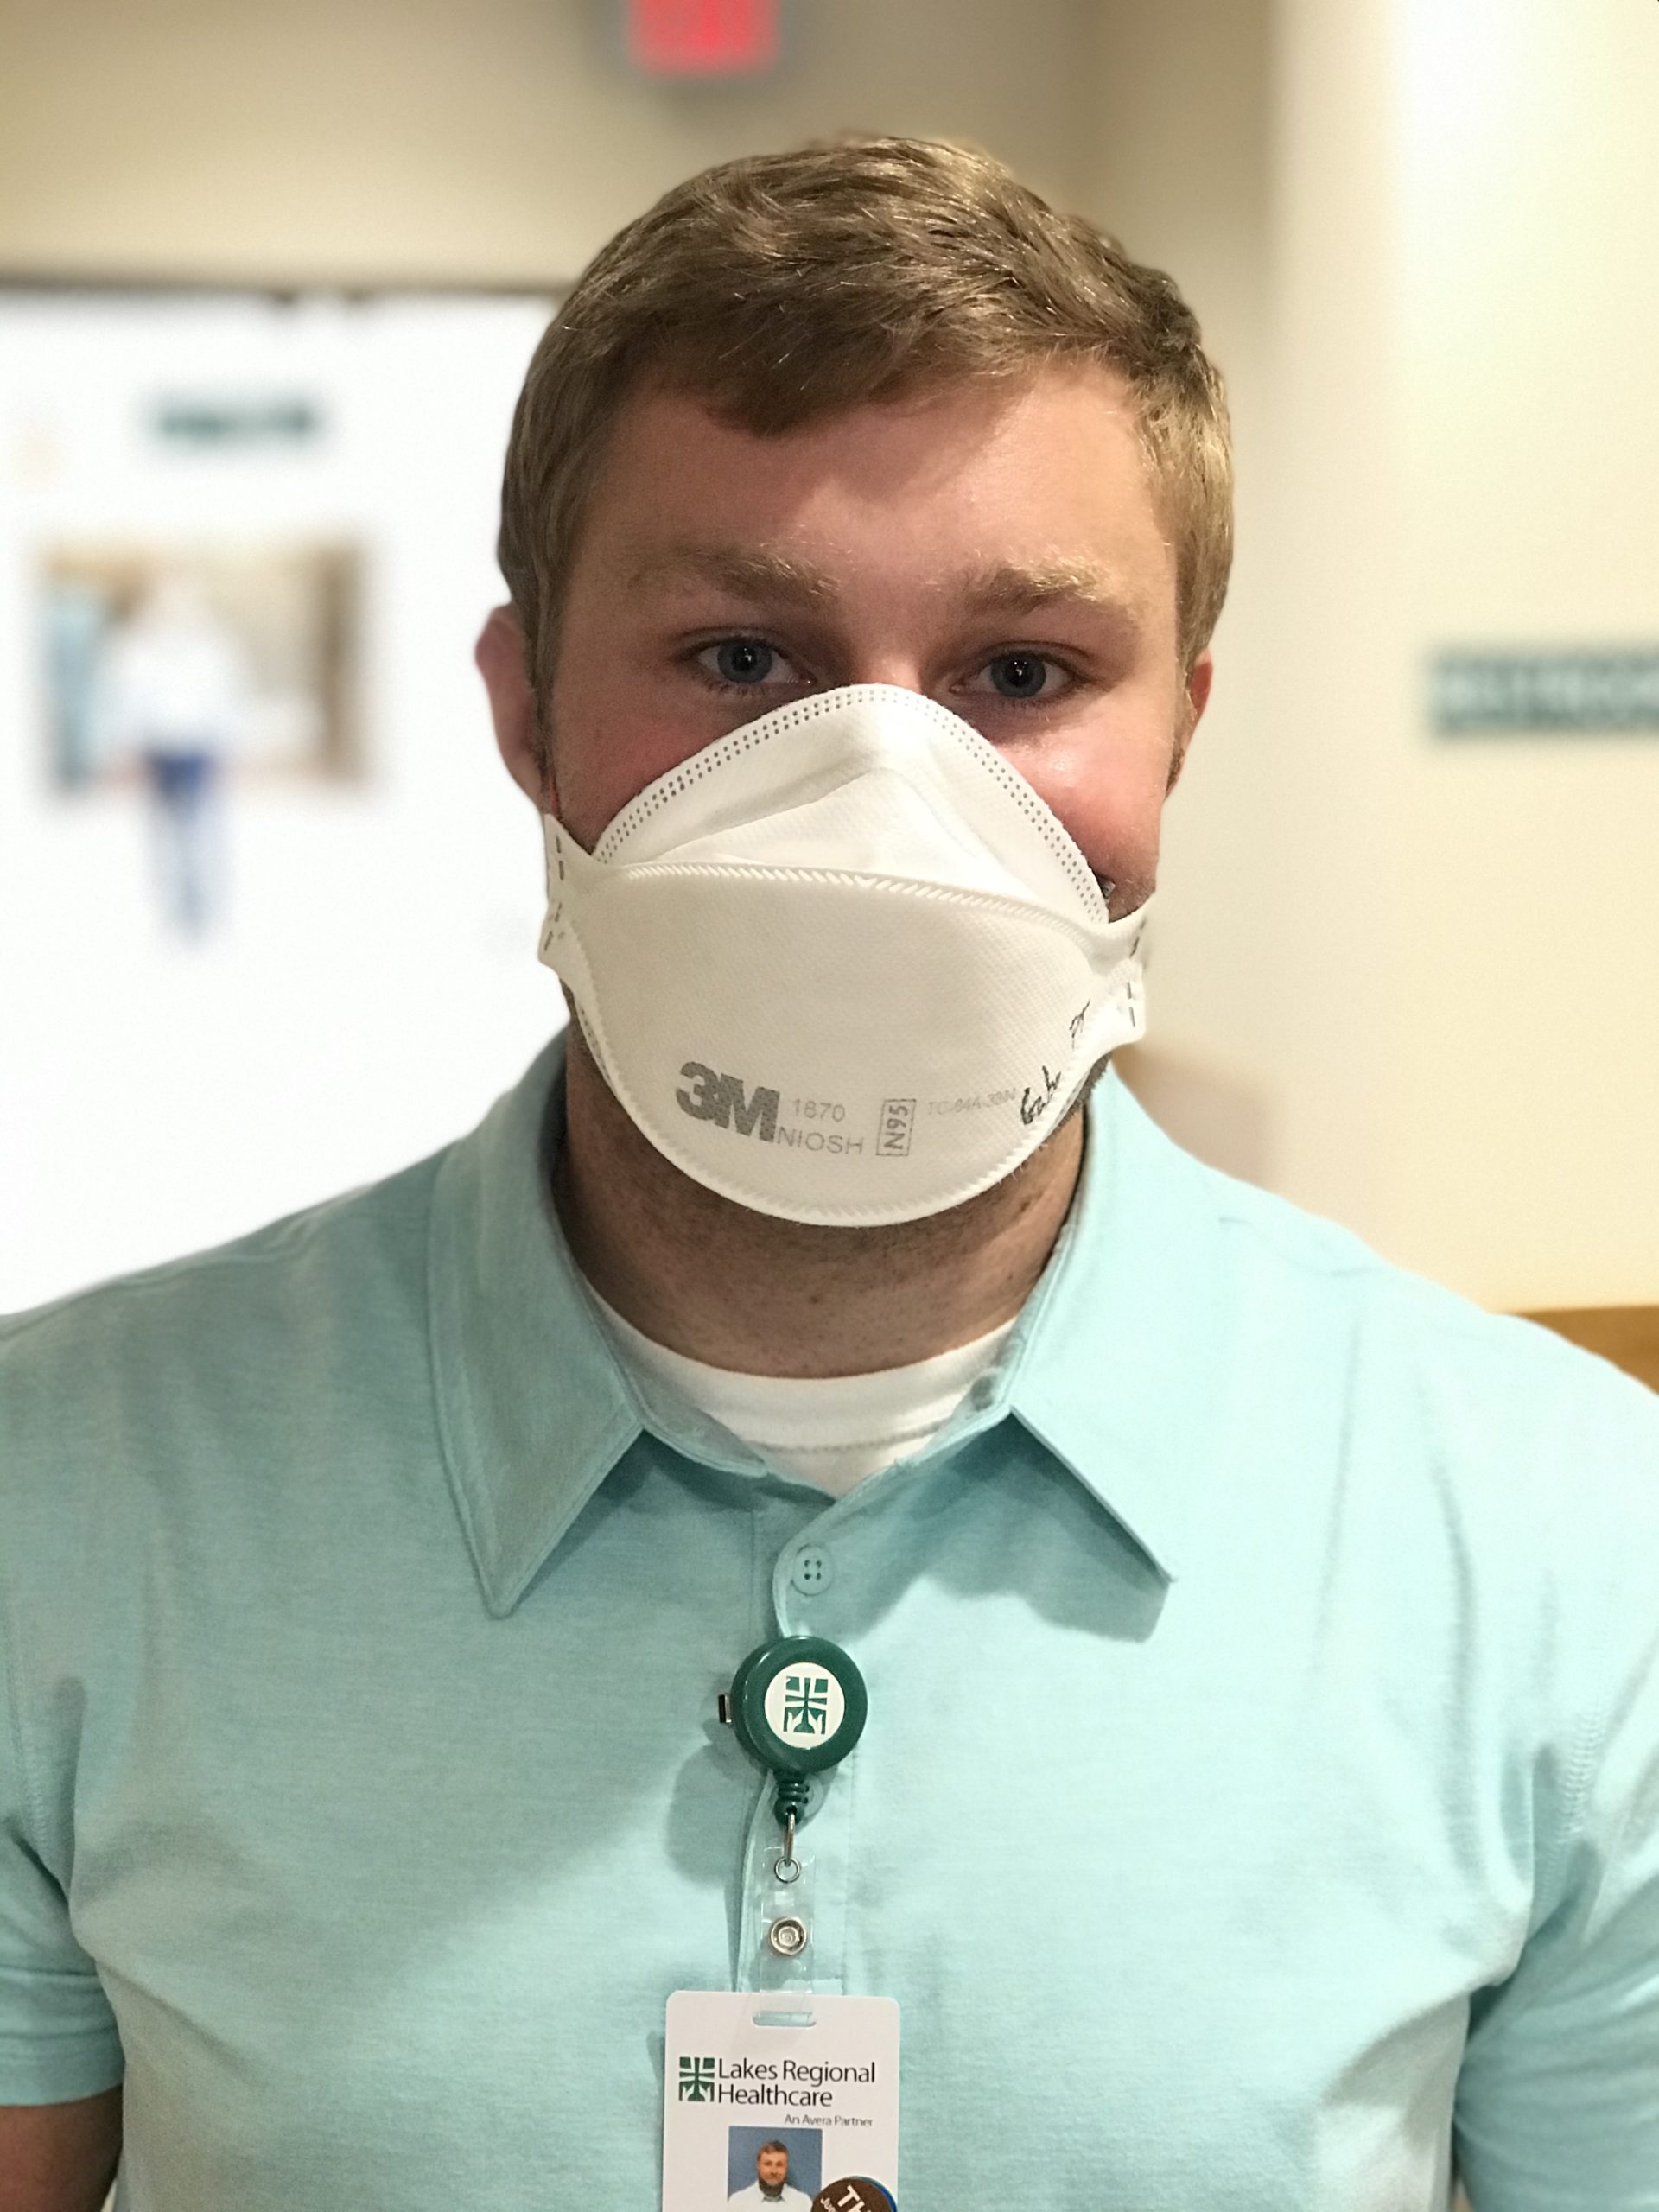 Gabe Goehring, DPT wearing a light green shirt, white face mask, and LRH name badge, looking at camera